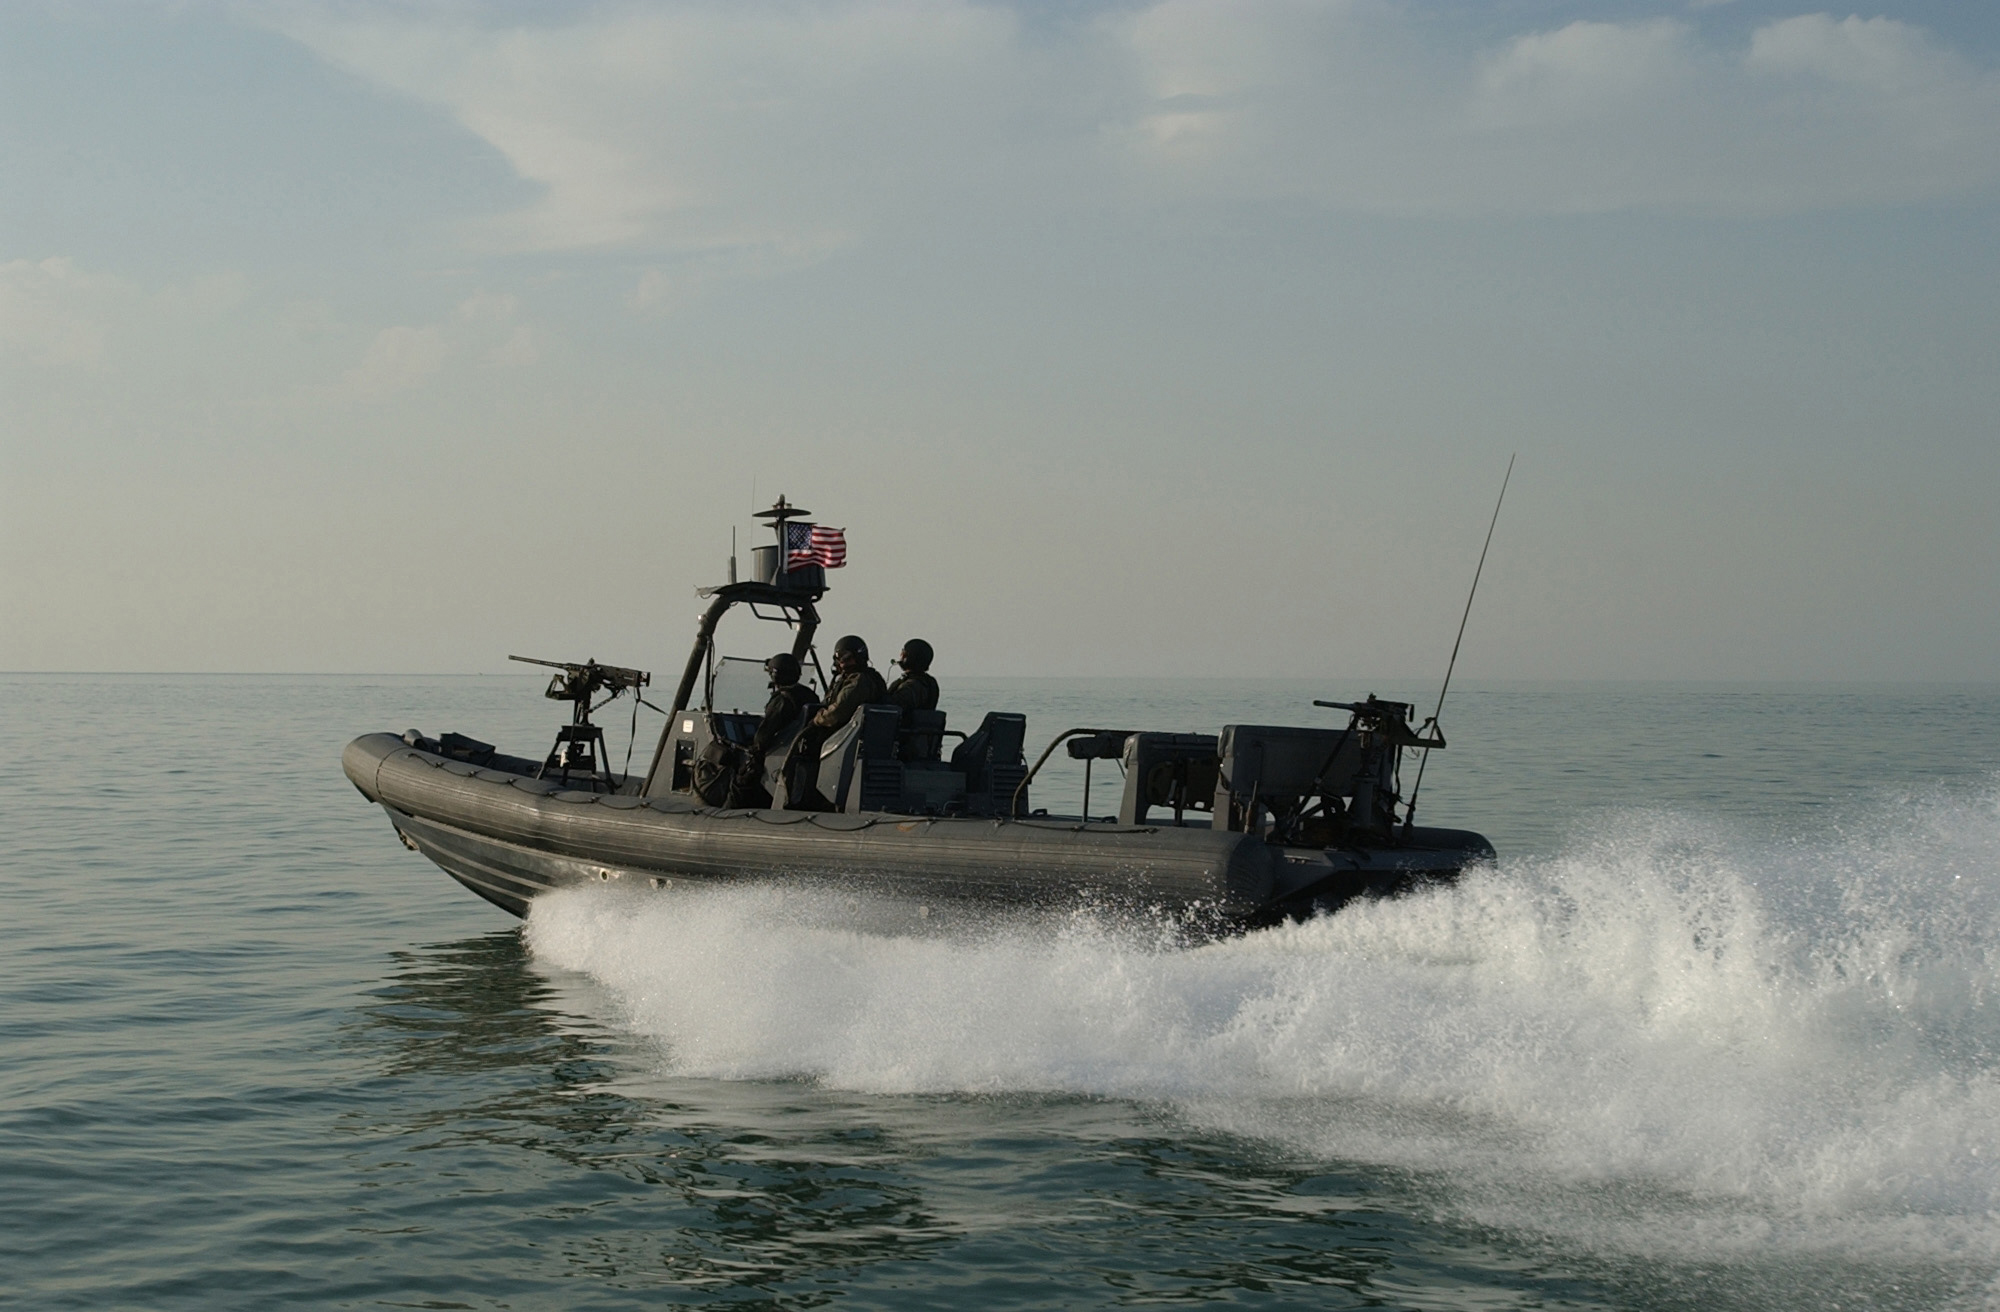 US_Navy_030218-N-5362A-009_Naval_Special_Warfare_combatant-craft_crewmen_operate_a_Rigid_Hull_Inflatable_Boat.jpg